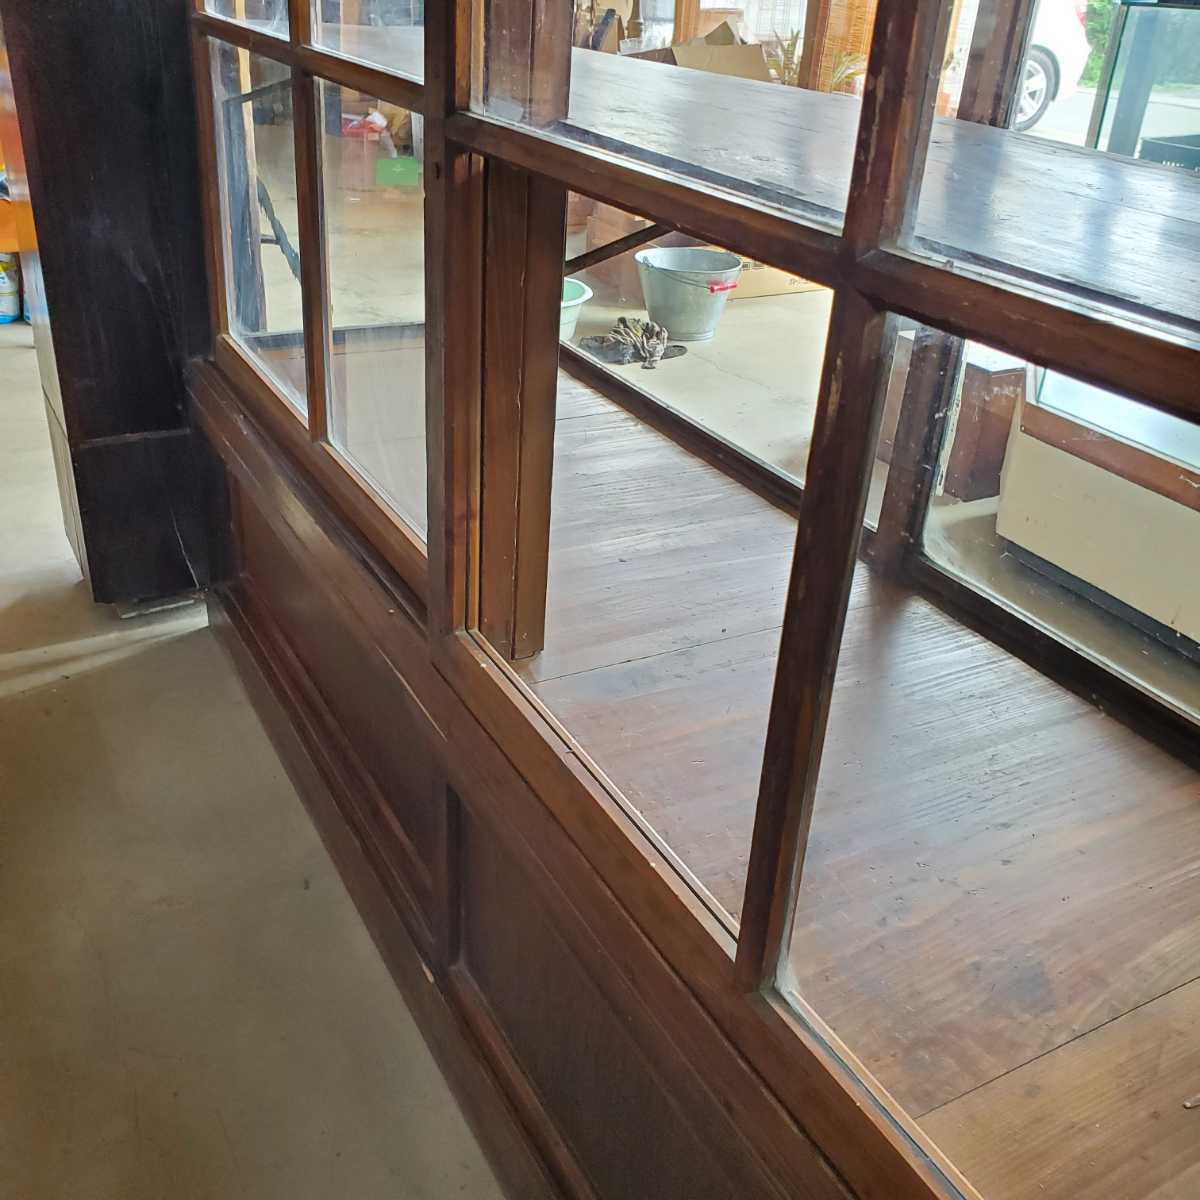  discount preliminary inspection possibility extra-large size taste ... exist .... wave glass old wooden glass case display shelf ( search display case Taisho romance No.1 receipt limitation (pick up) 